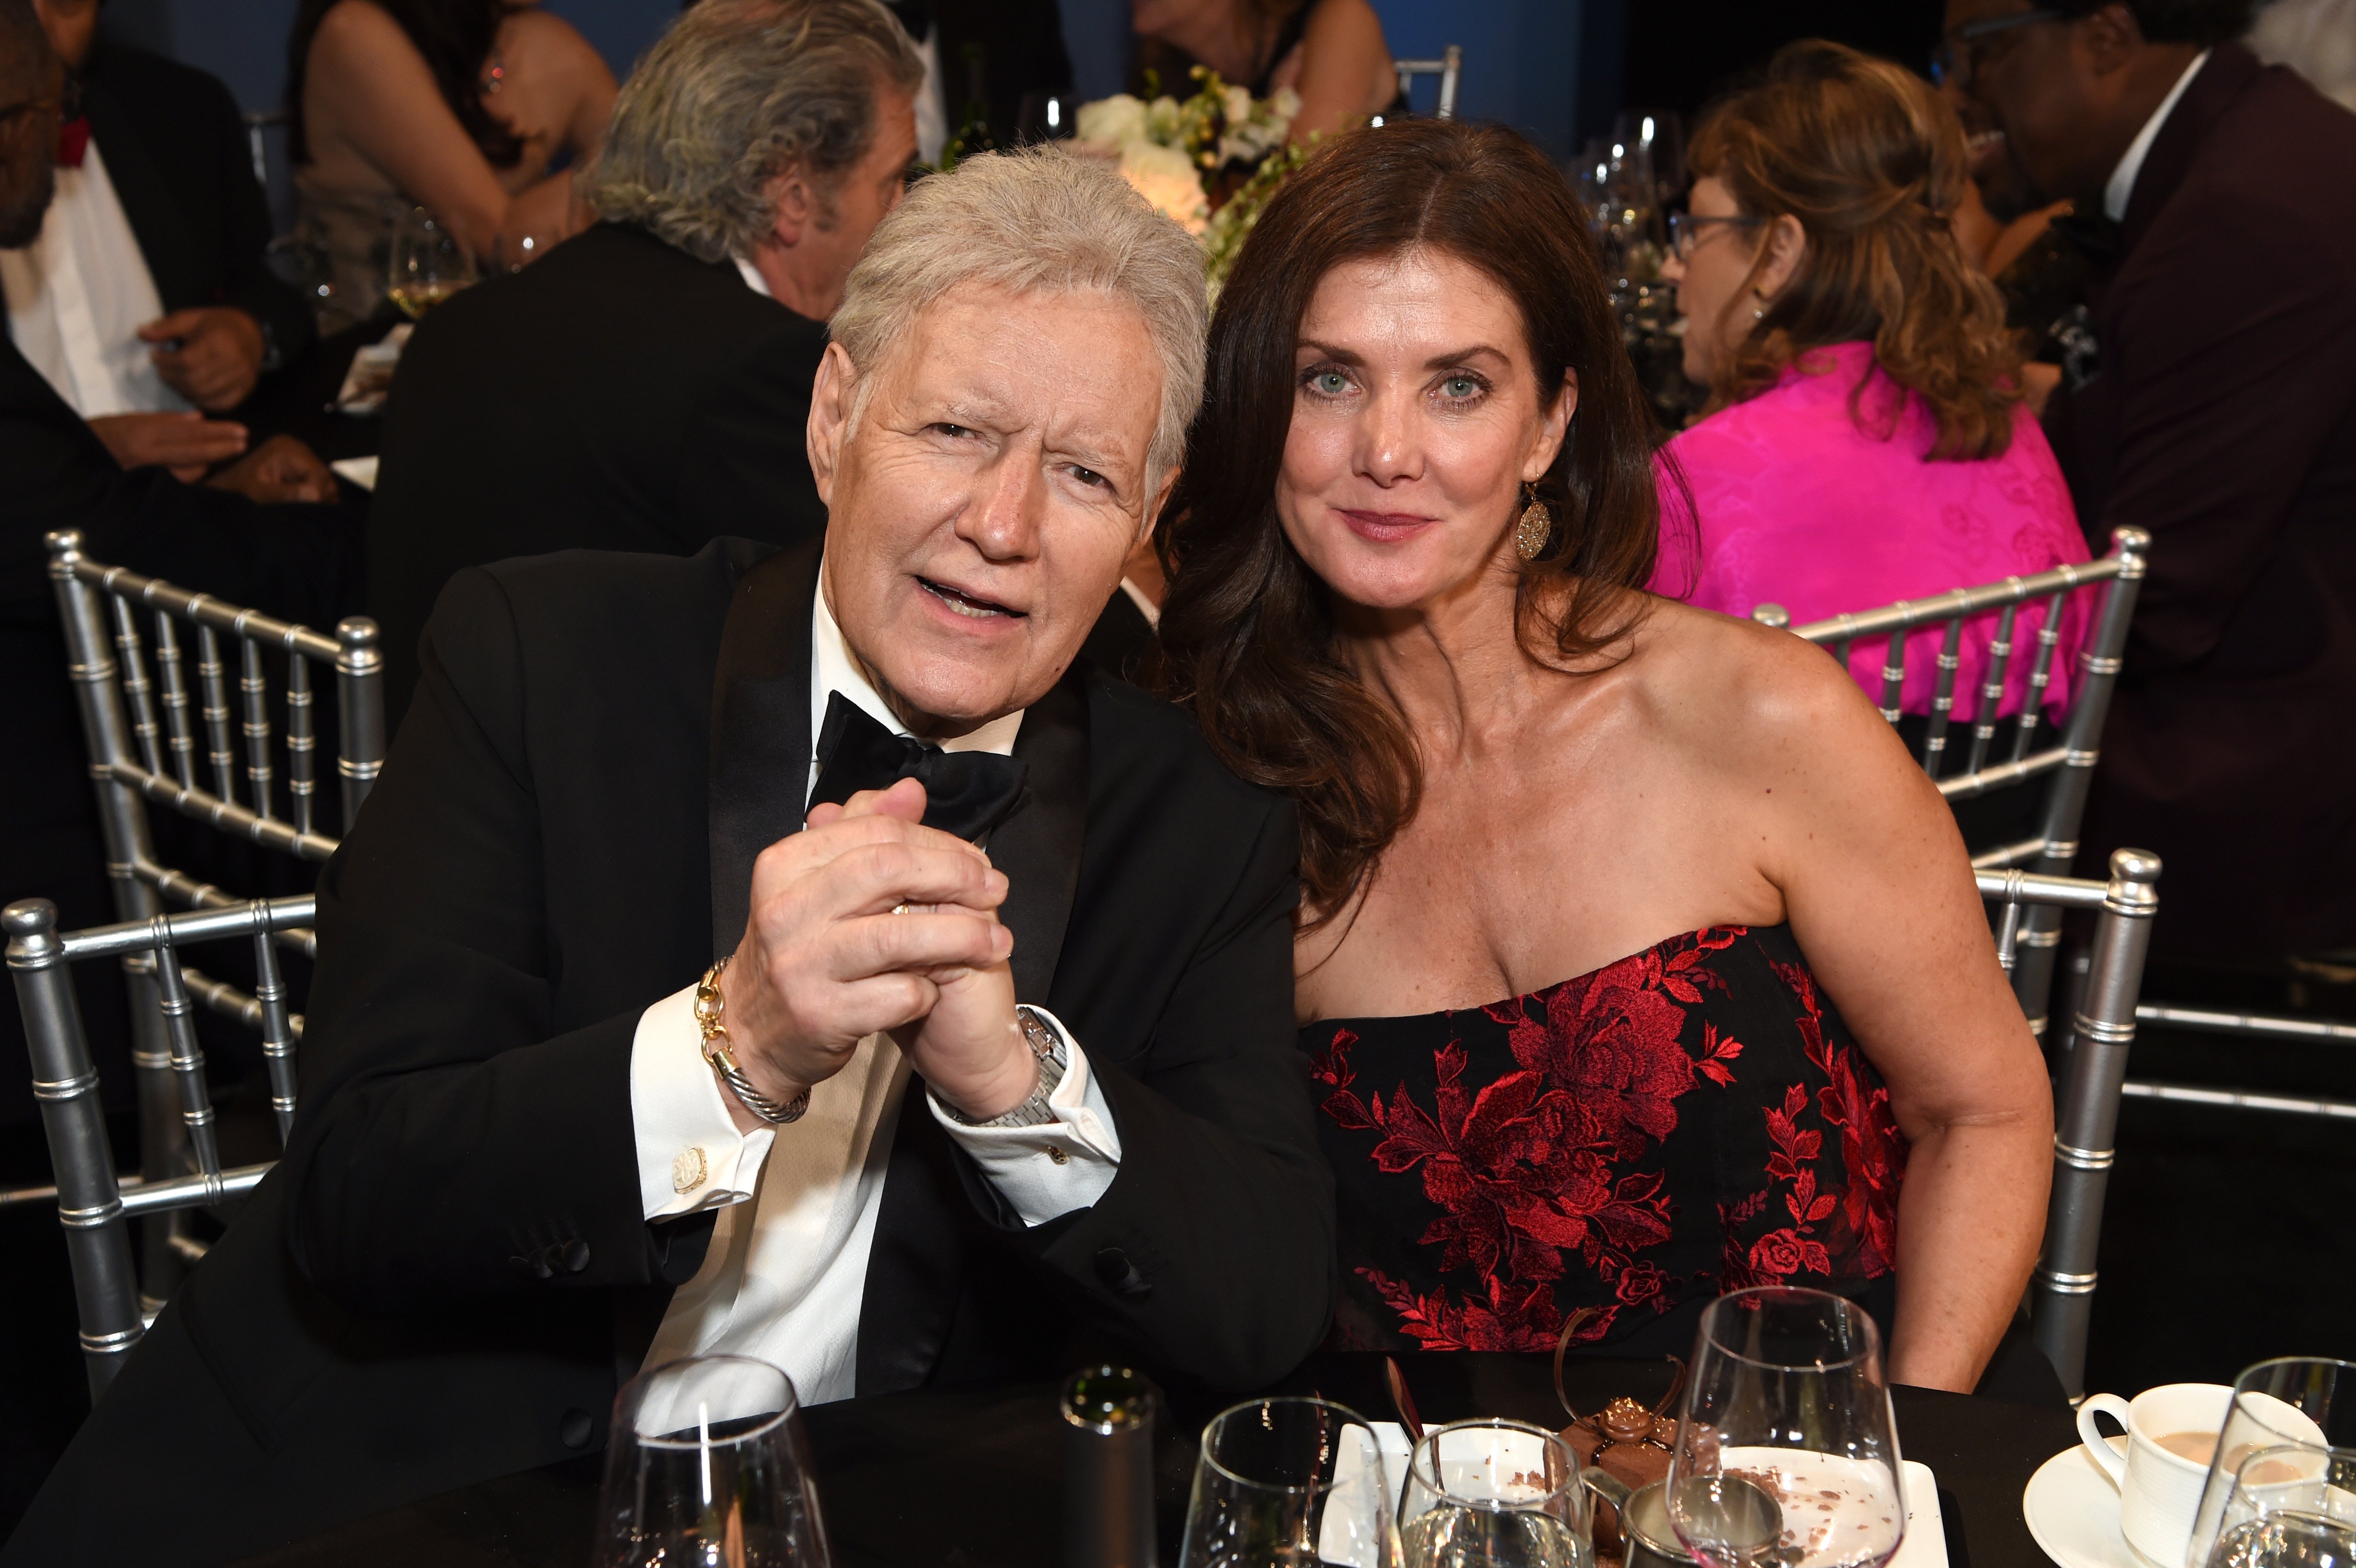  Alex Trebek and Jean Currivan Trebek attend the 47th AFI Life Achievement Award honoring Denzel Washington on June 06, 2019, in Hollywood, California. | Source: Getty Images.